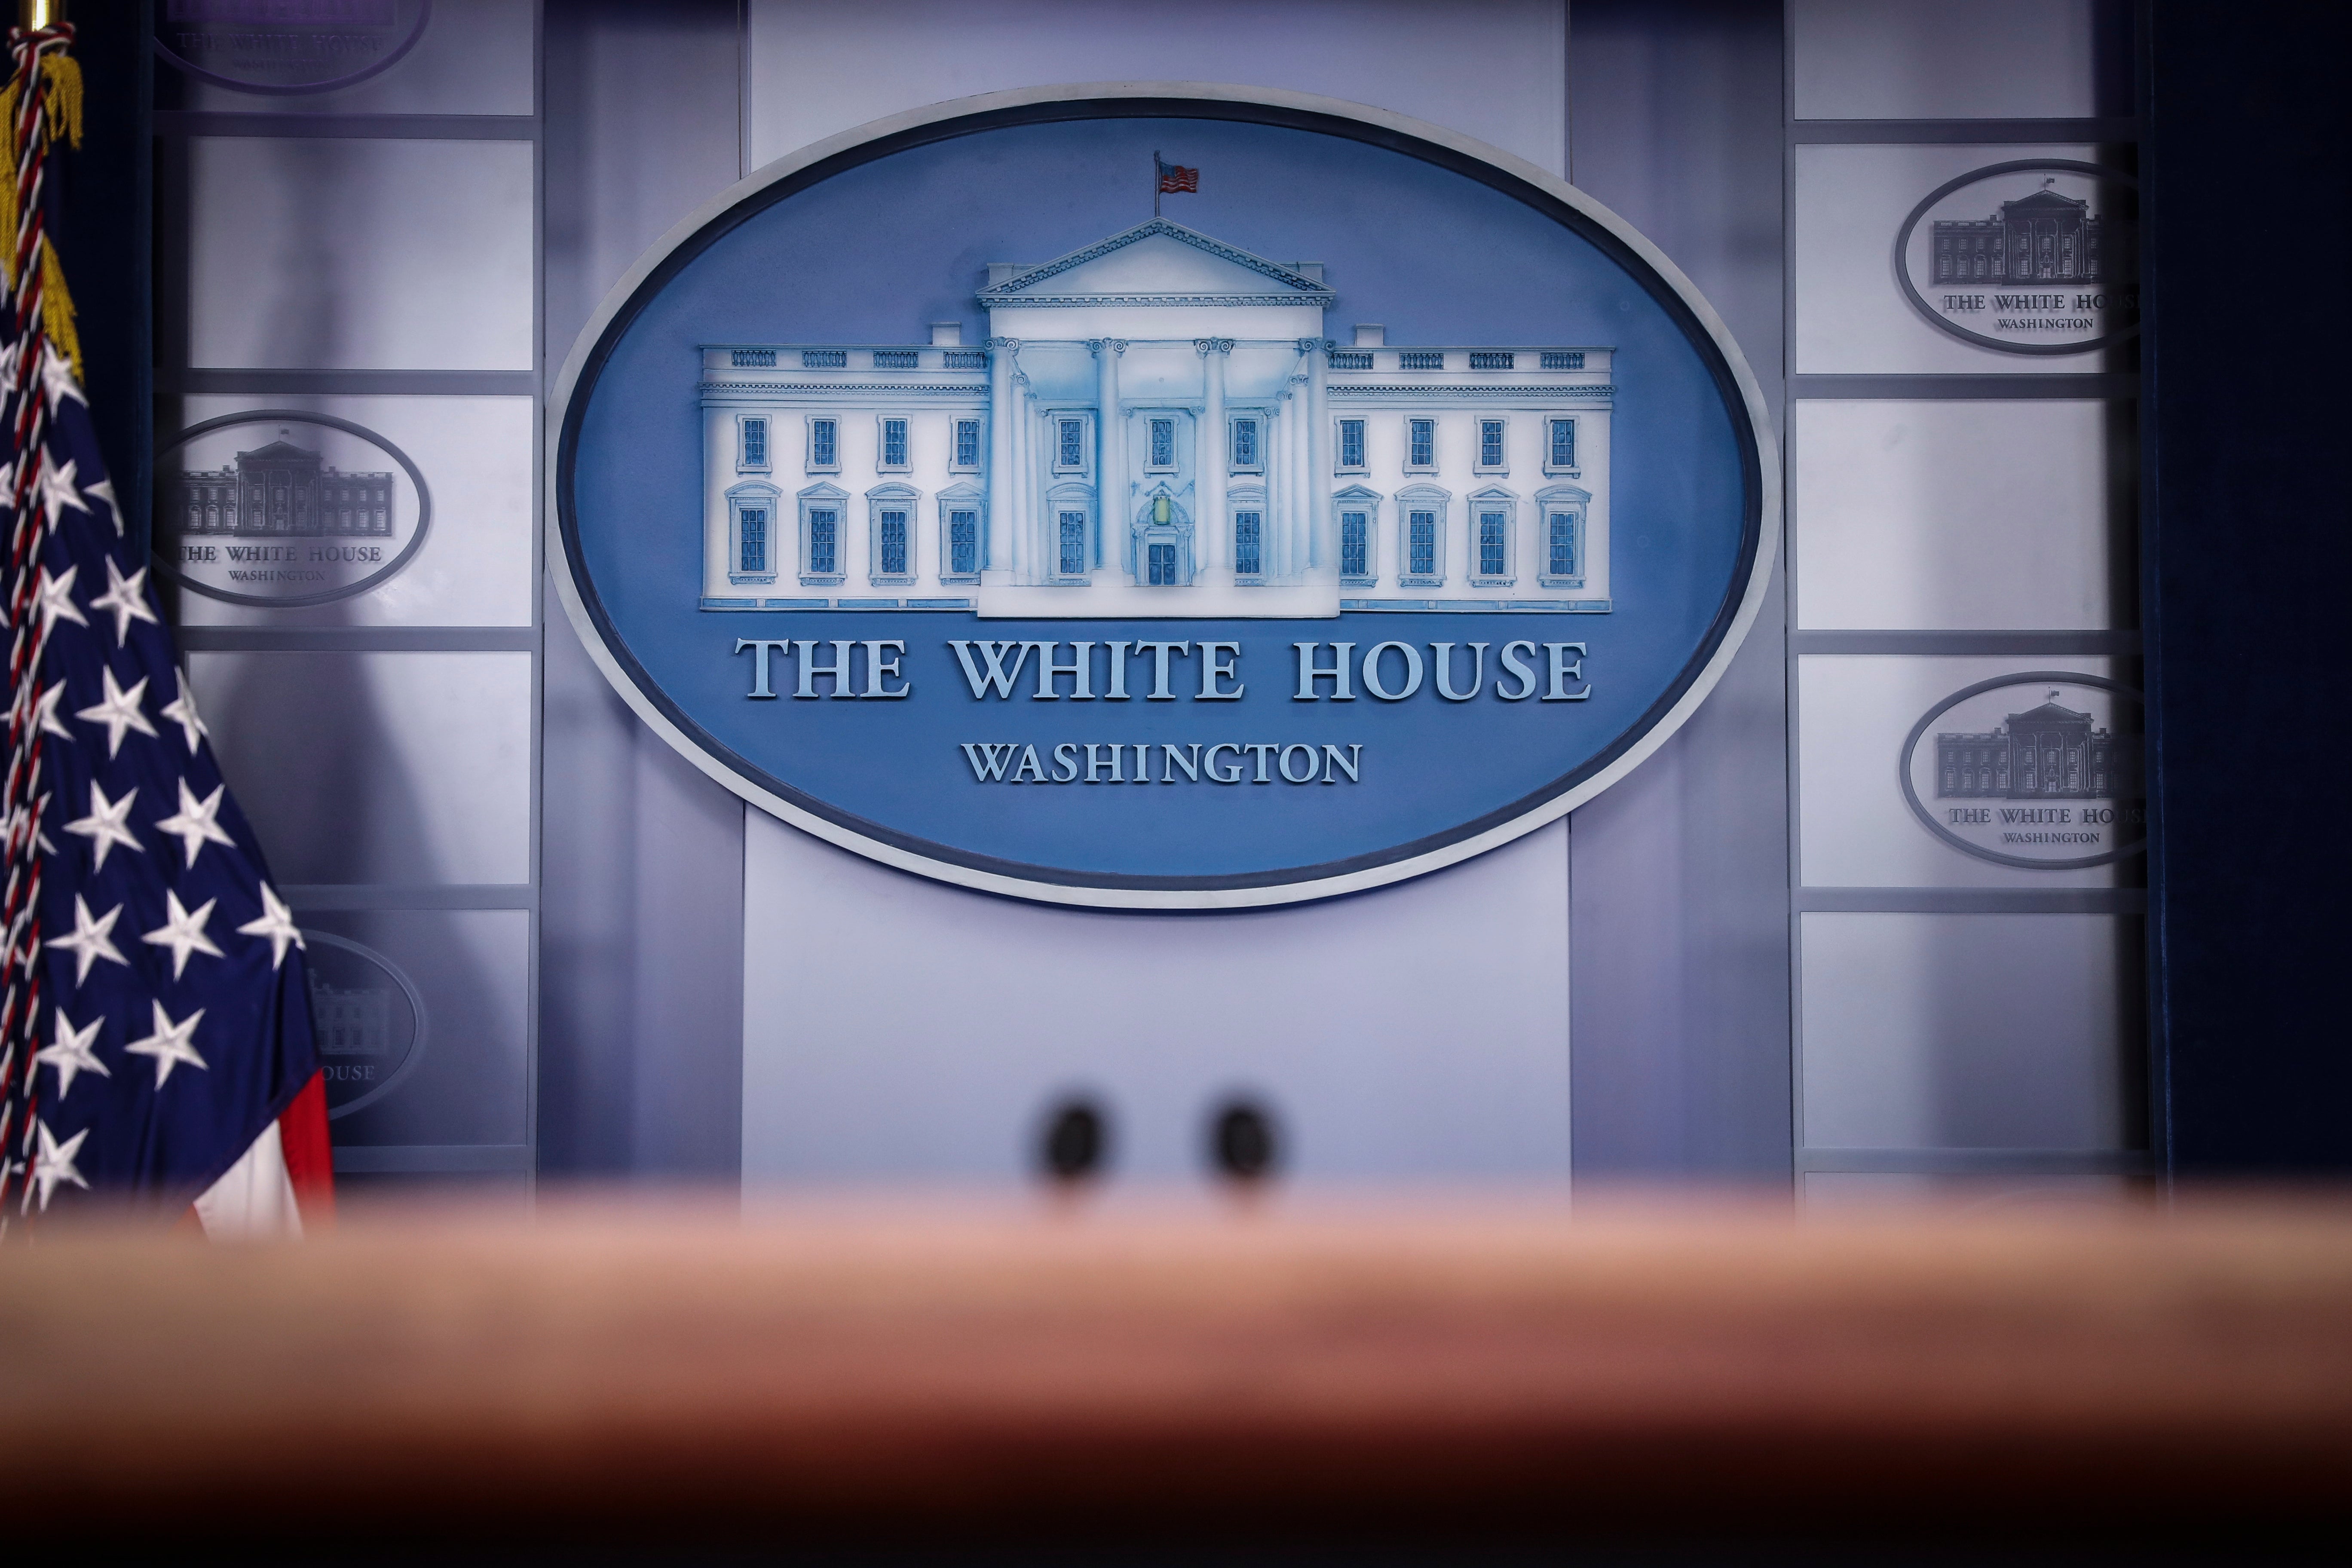 The White House press briefing room.